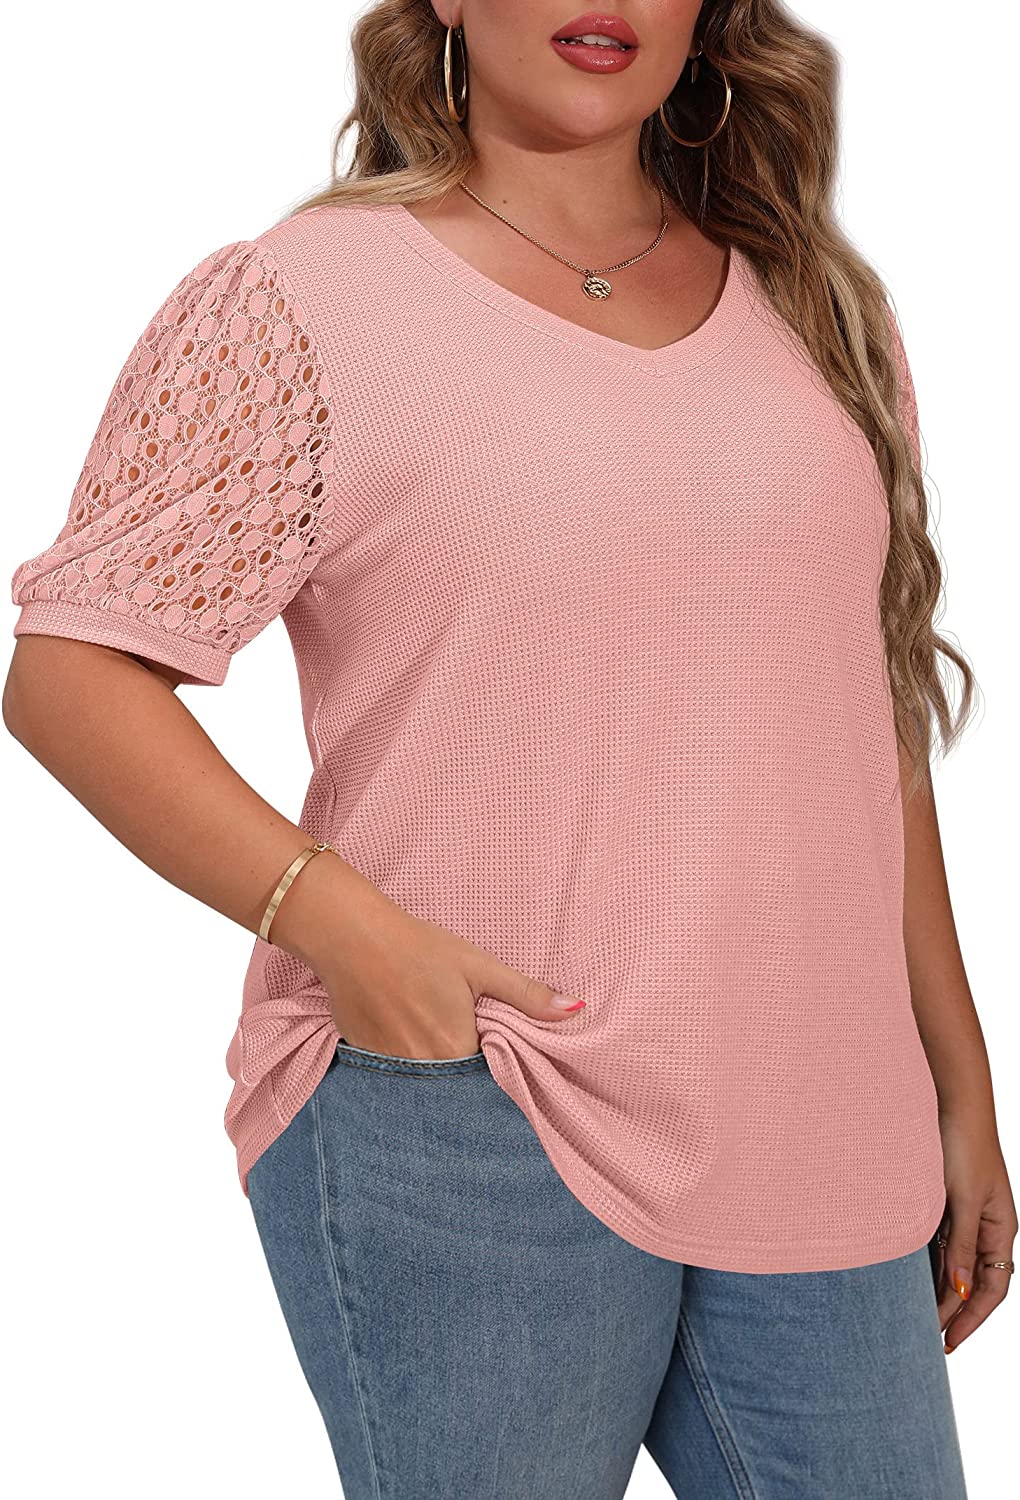 OLRIK Plus Size Tops for Women Lace Sleeve Blouse Waffle Knit Long